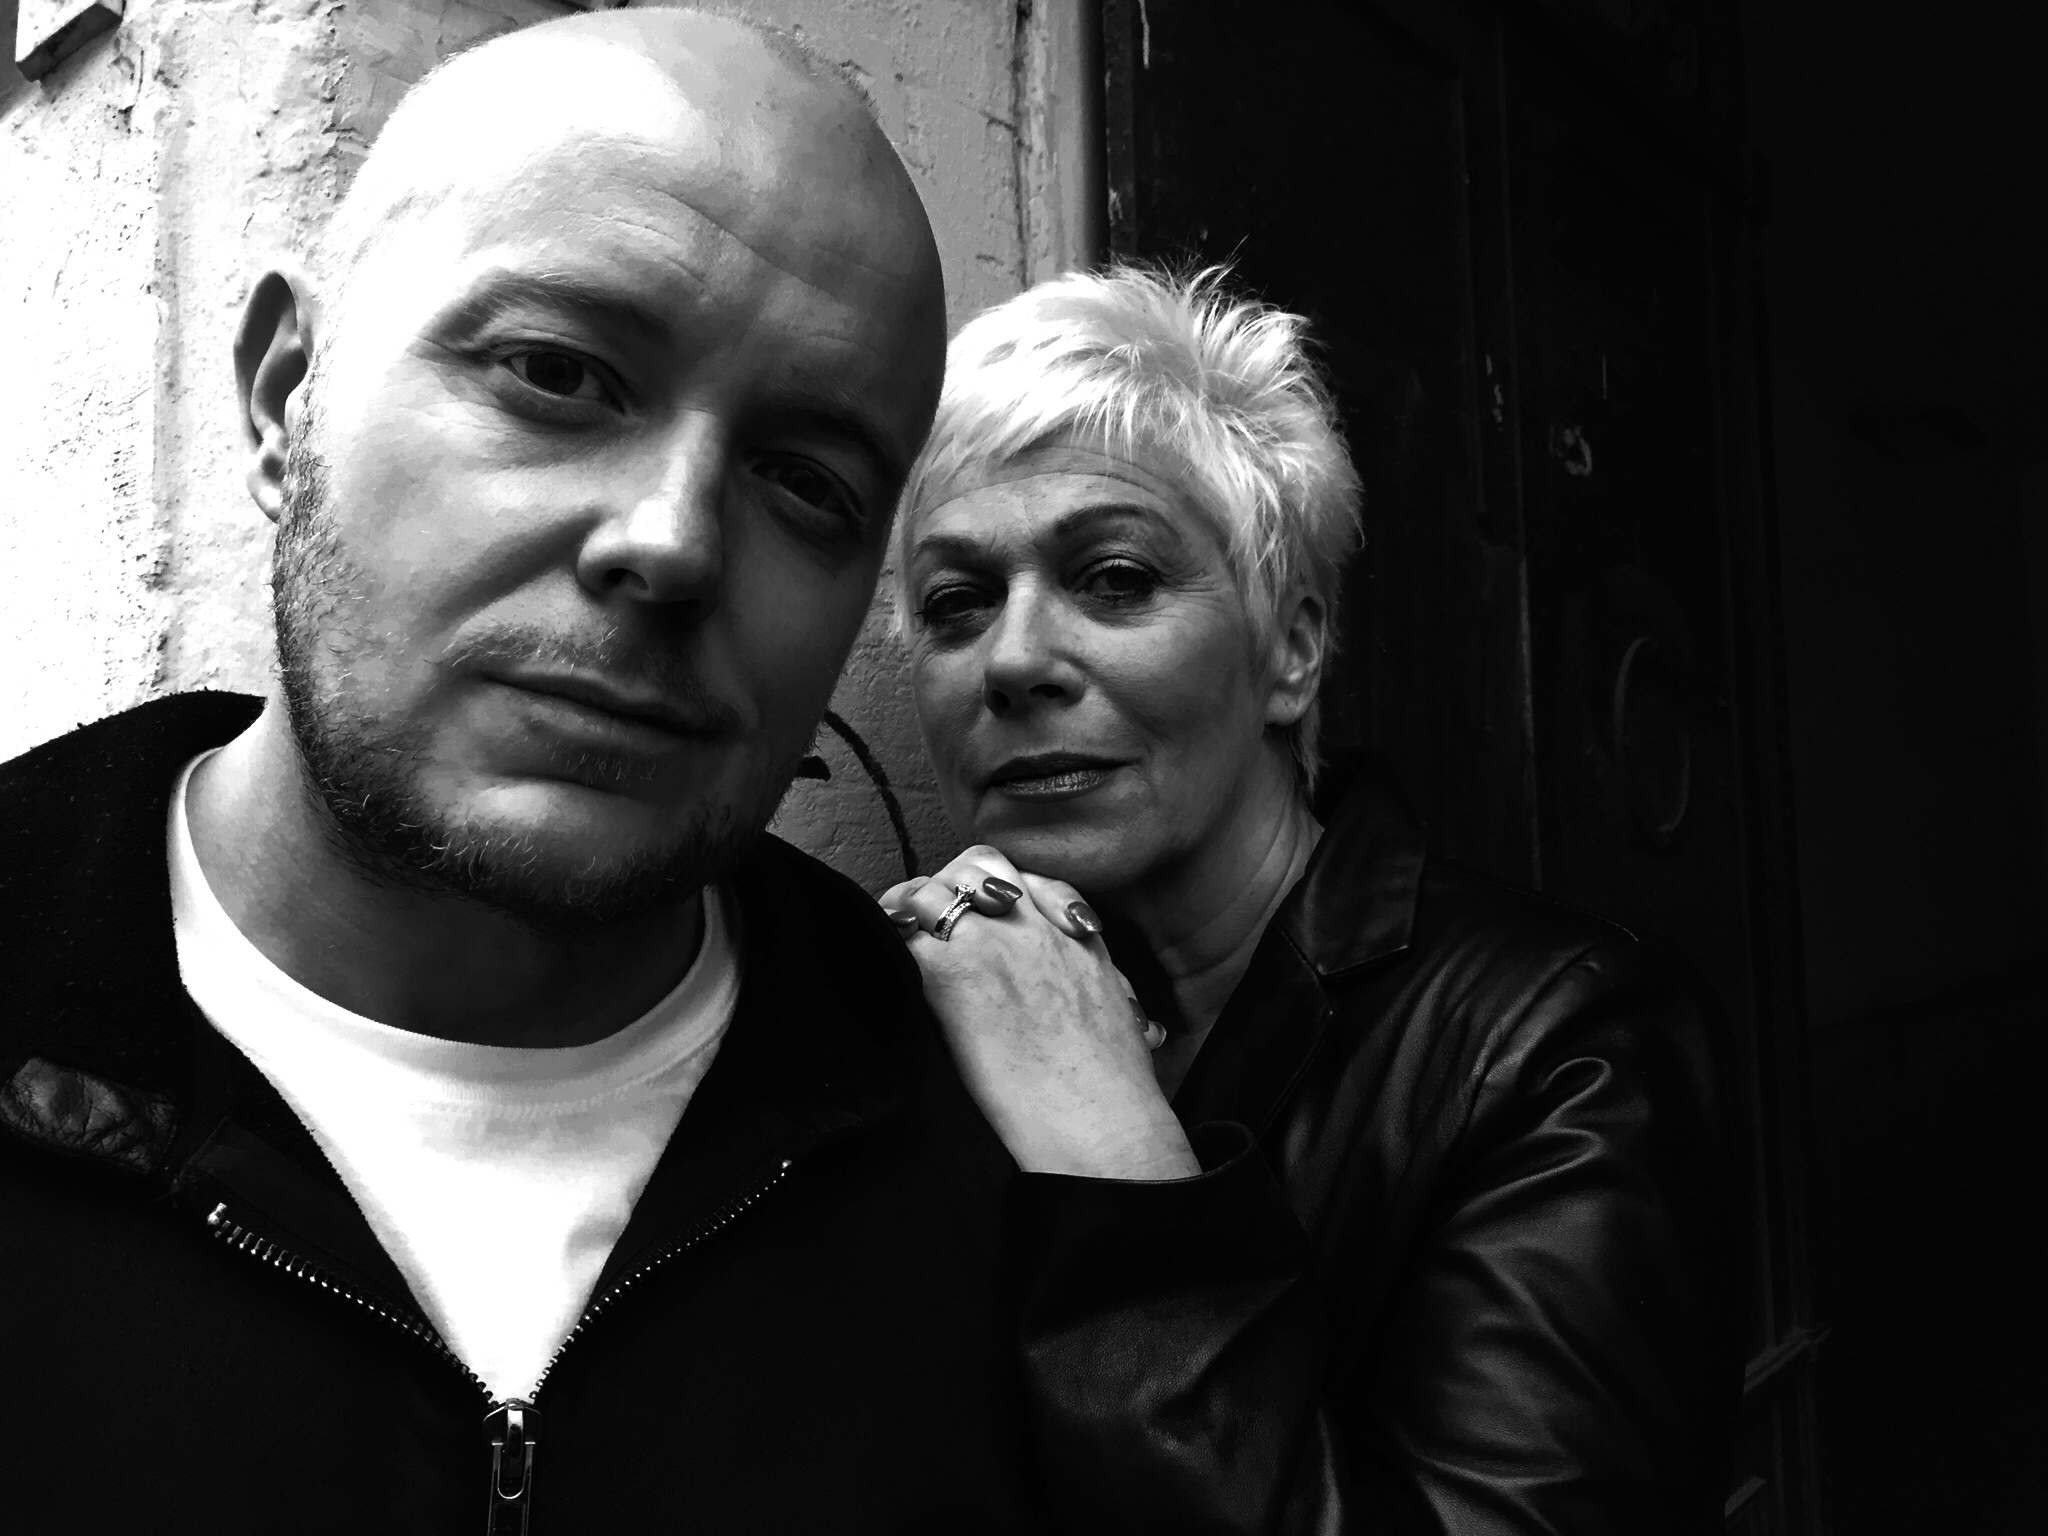 Lincoln Townley and Wife Actress Denise Welch in Prague